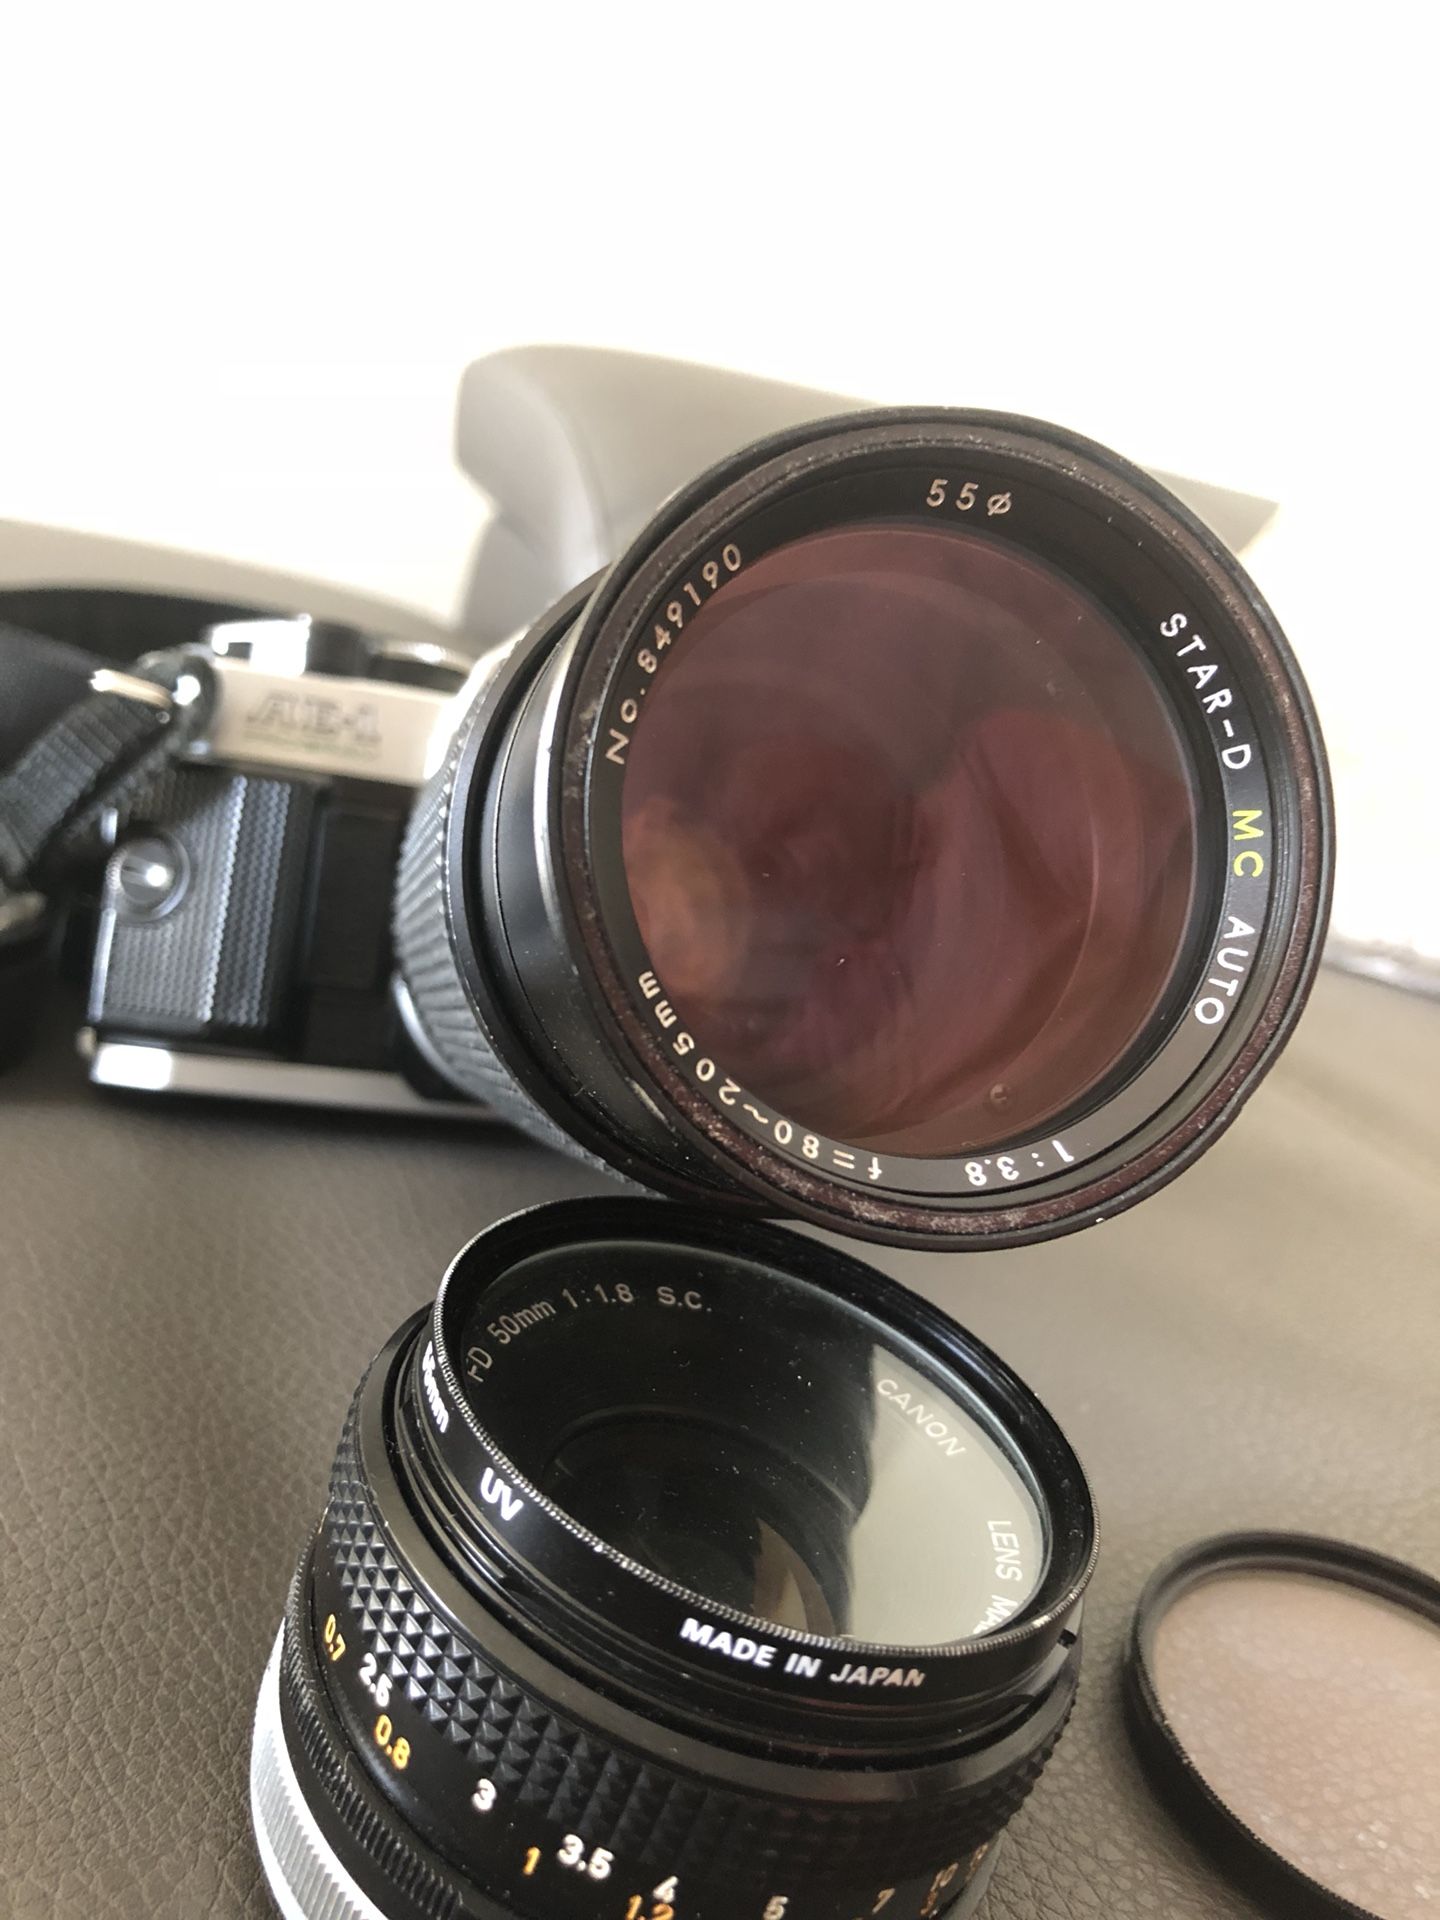 AE-1 Canon SLR Camera with lenses